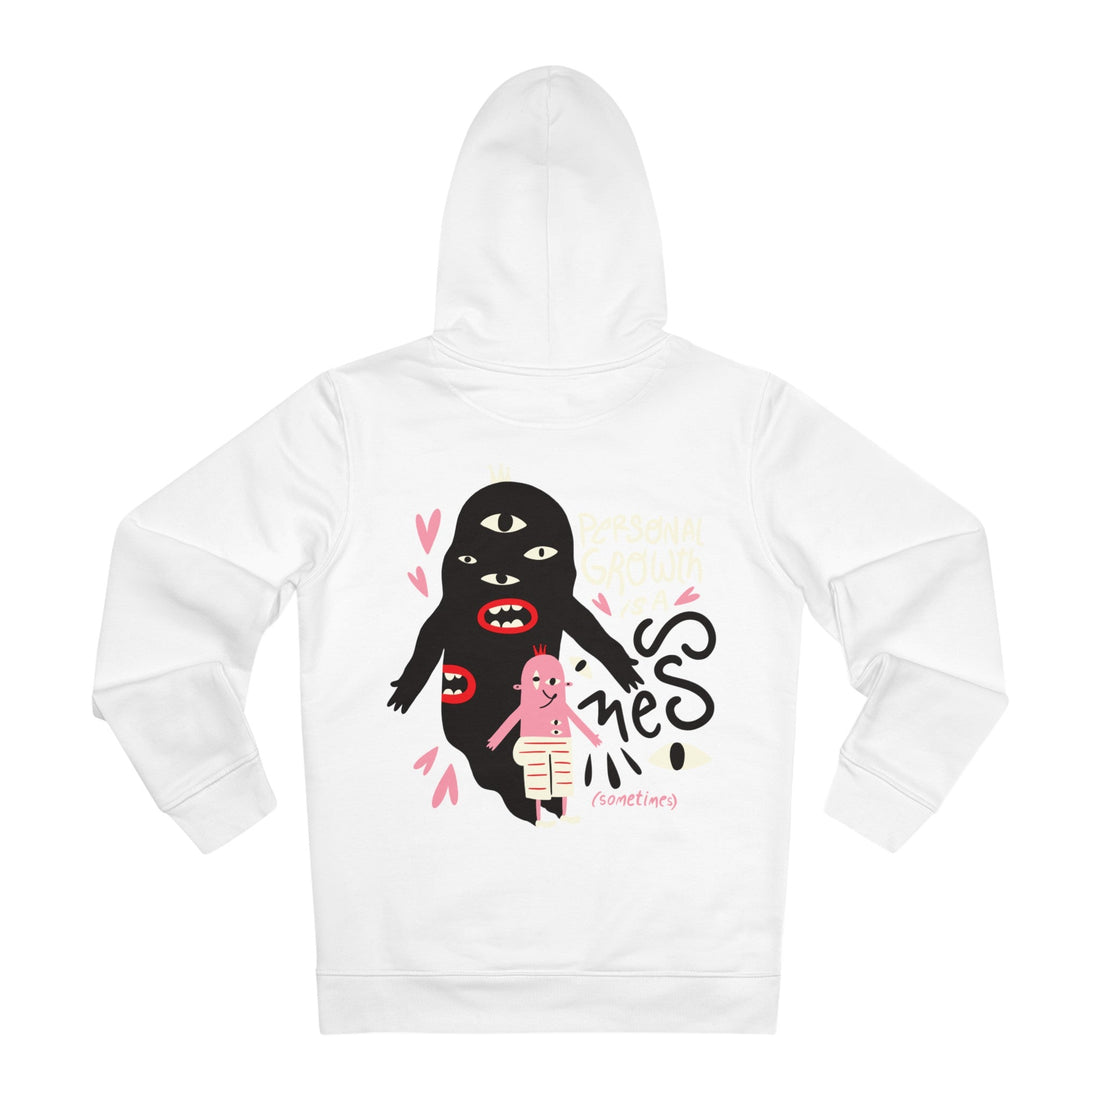 Printify Hoodie White / S Personal Growth is a mess (sometimes) - Weird Characters with Positive Quotes - Hoodie - Back Design